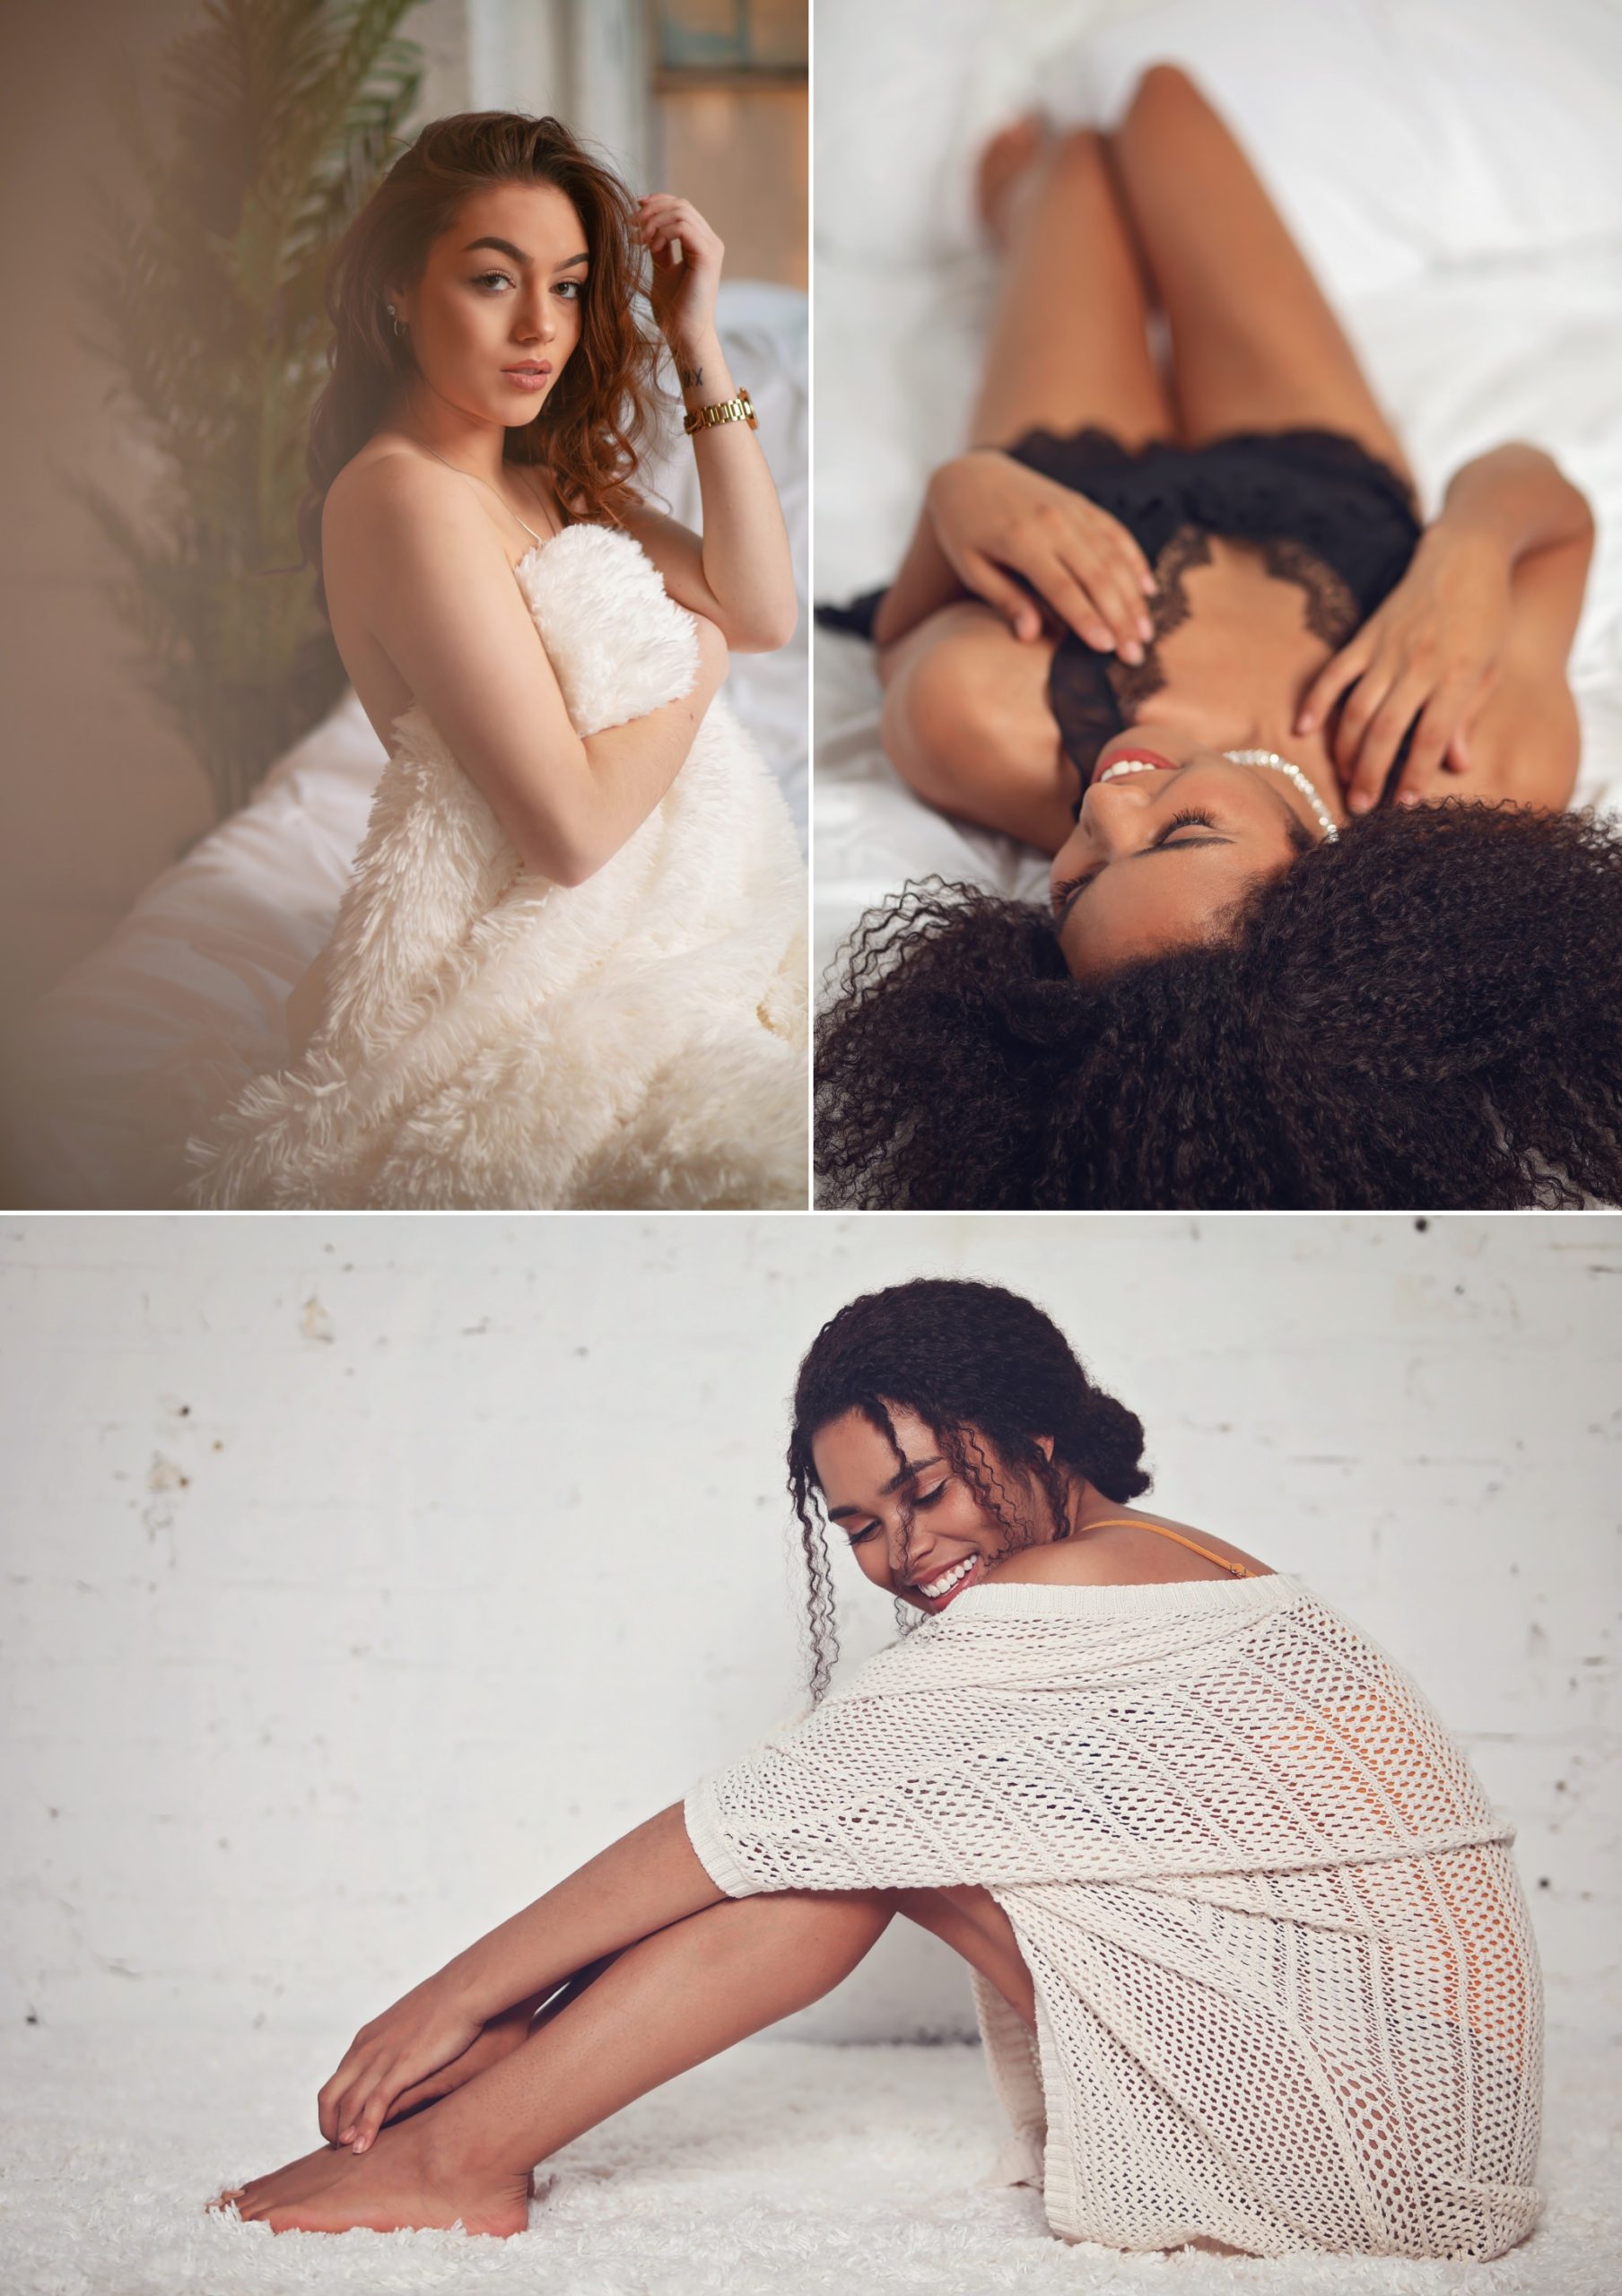 3 tips to improve your boudoir photography - Tangents